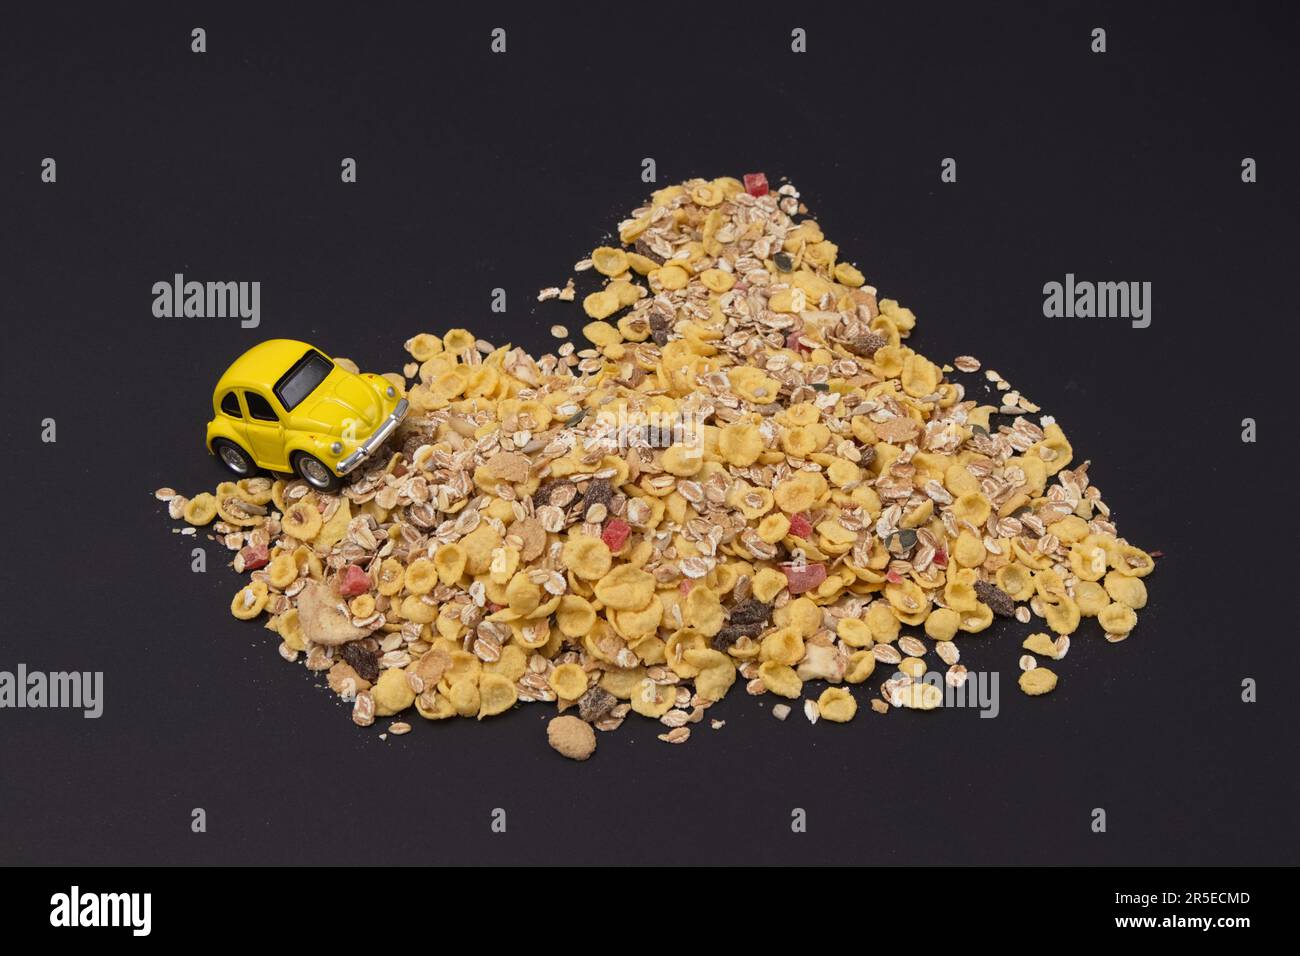 Yellow Beetle climbs a mountain of cornflakes on a black background. Minimal life style concept. Stock Photo